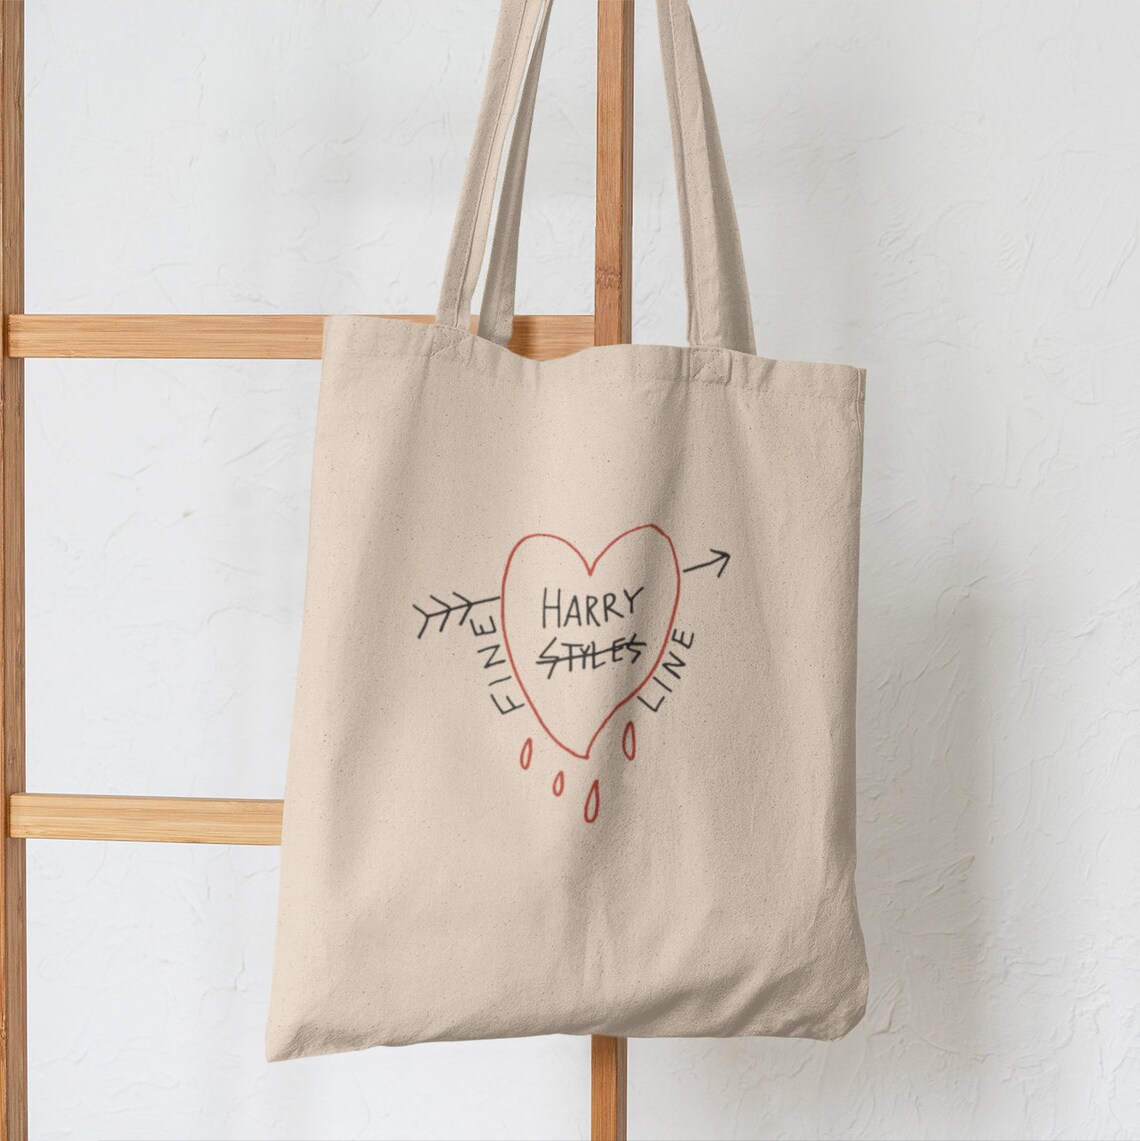 Harry Styles Fine Line Tote Bag Harry Styles Tote Bag | Etsy